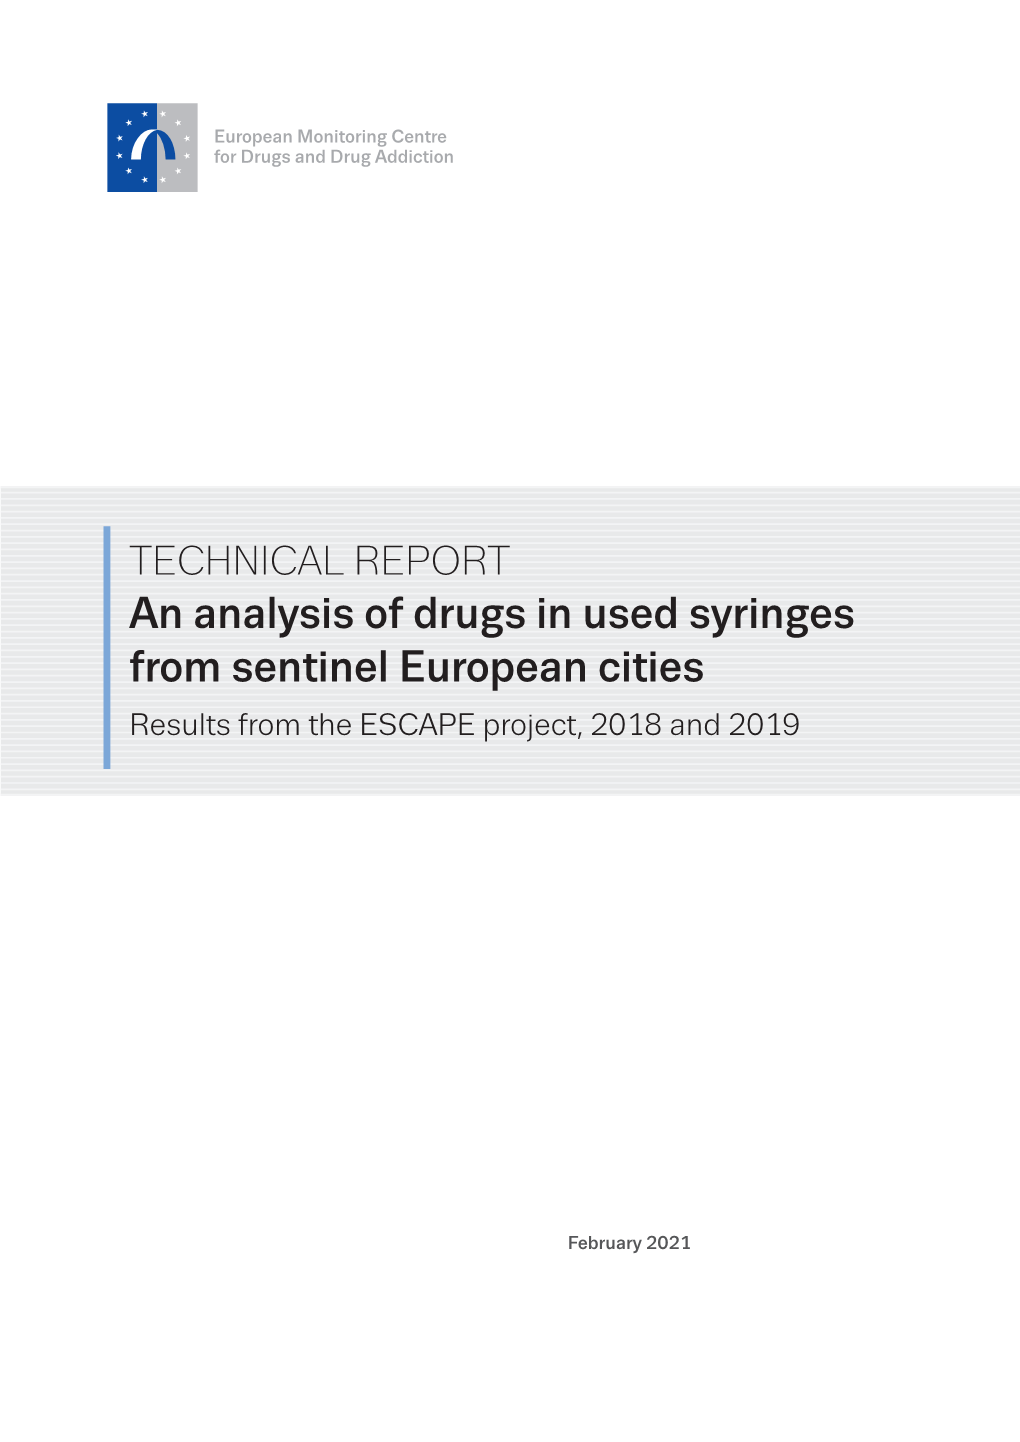 An Analysis of Drugs in Used Syringes from Sentinel European Cities Results from the ESCAPE Project, 2018 and 2019